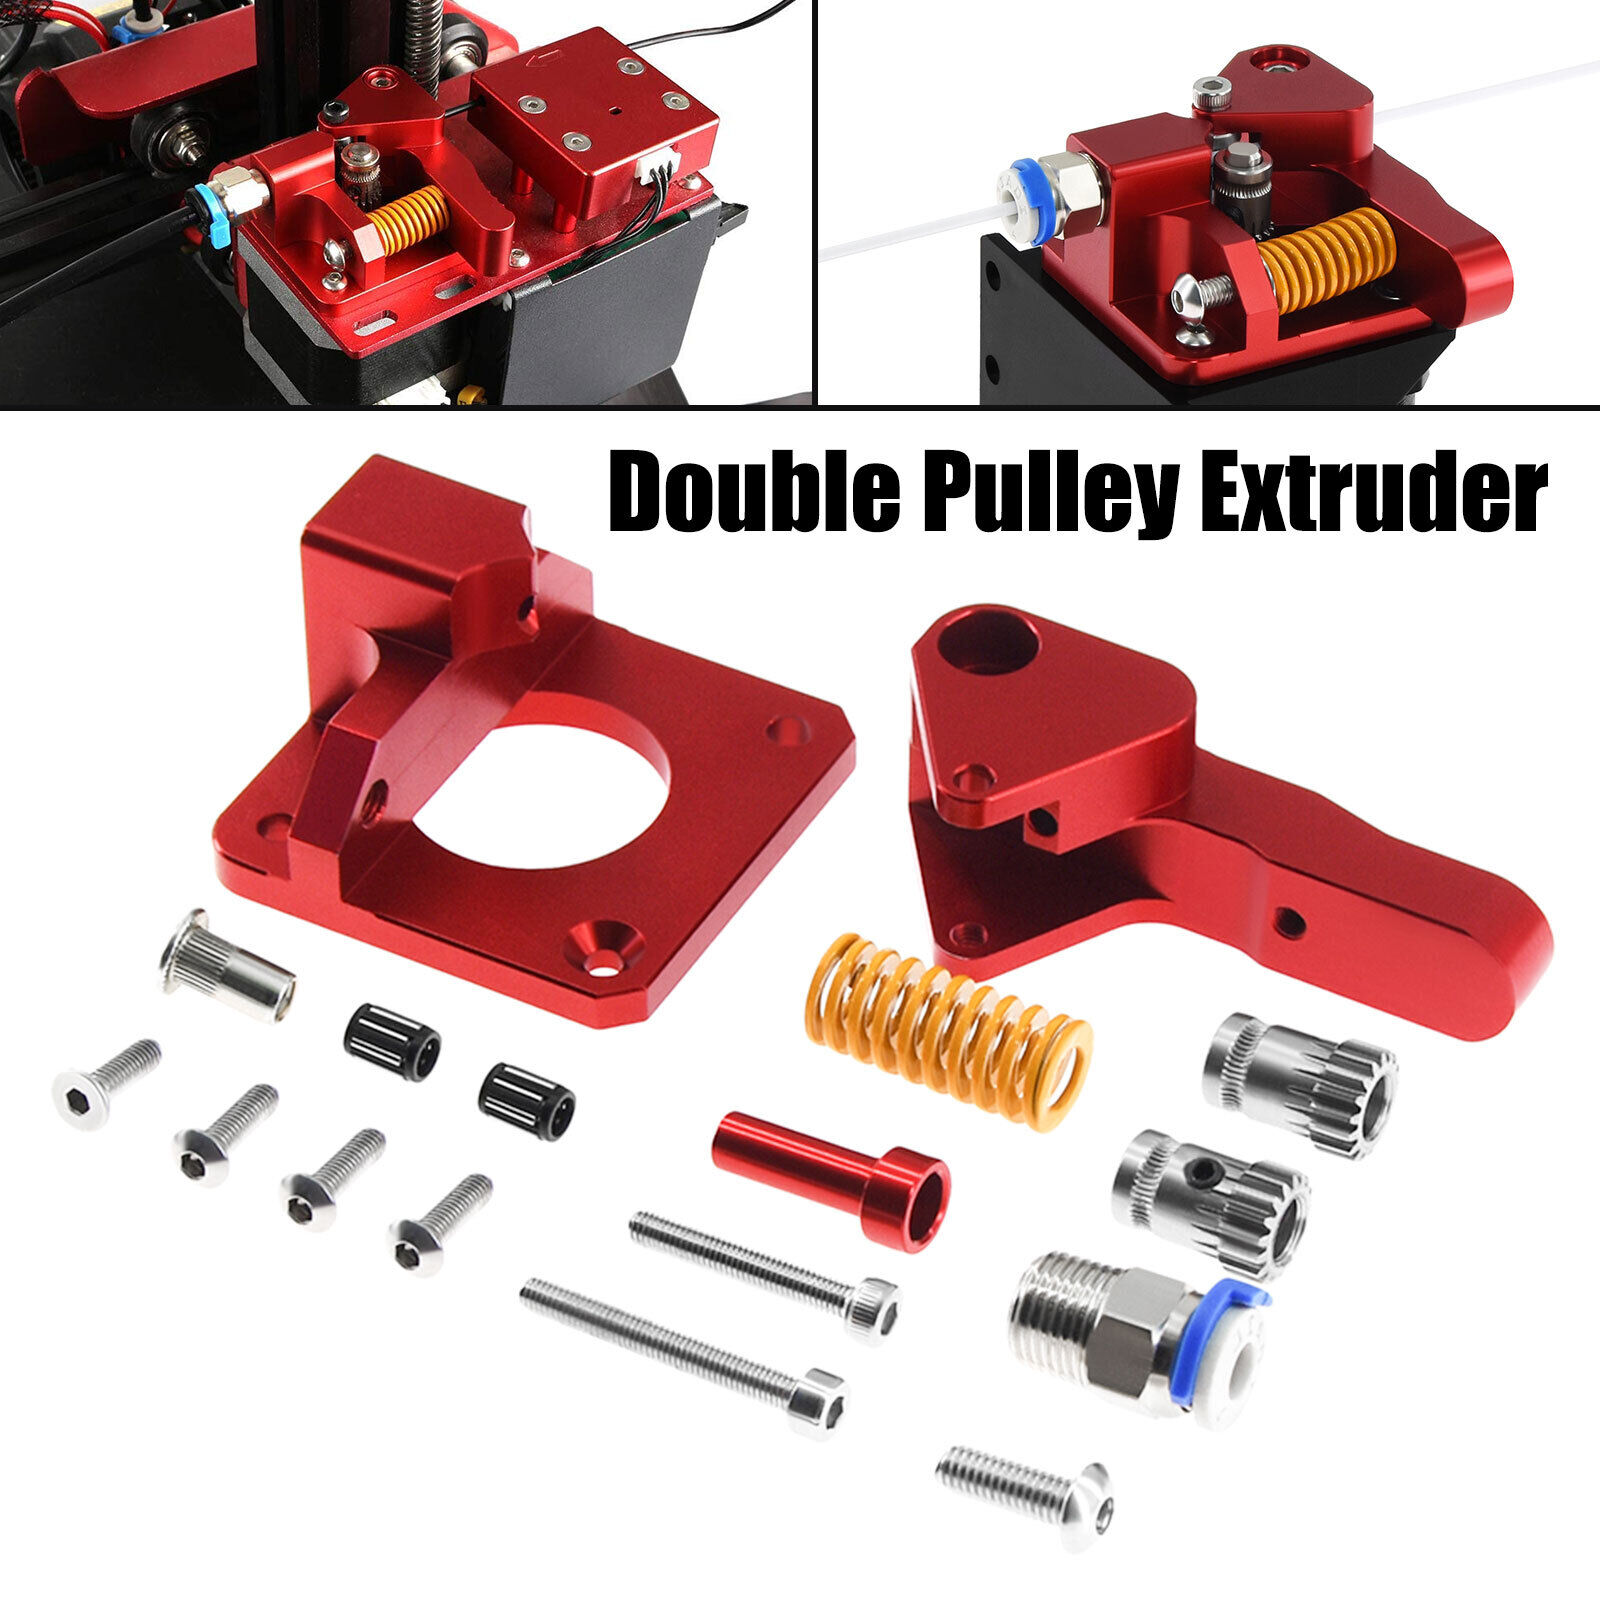 Dual Gear Extruder MK8 Drive Feed Extruder for Creality 3D Printer Ender 3/3 Pro